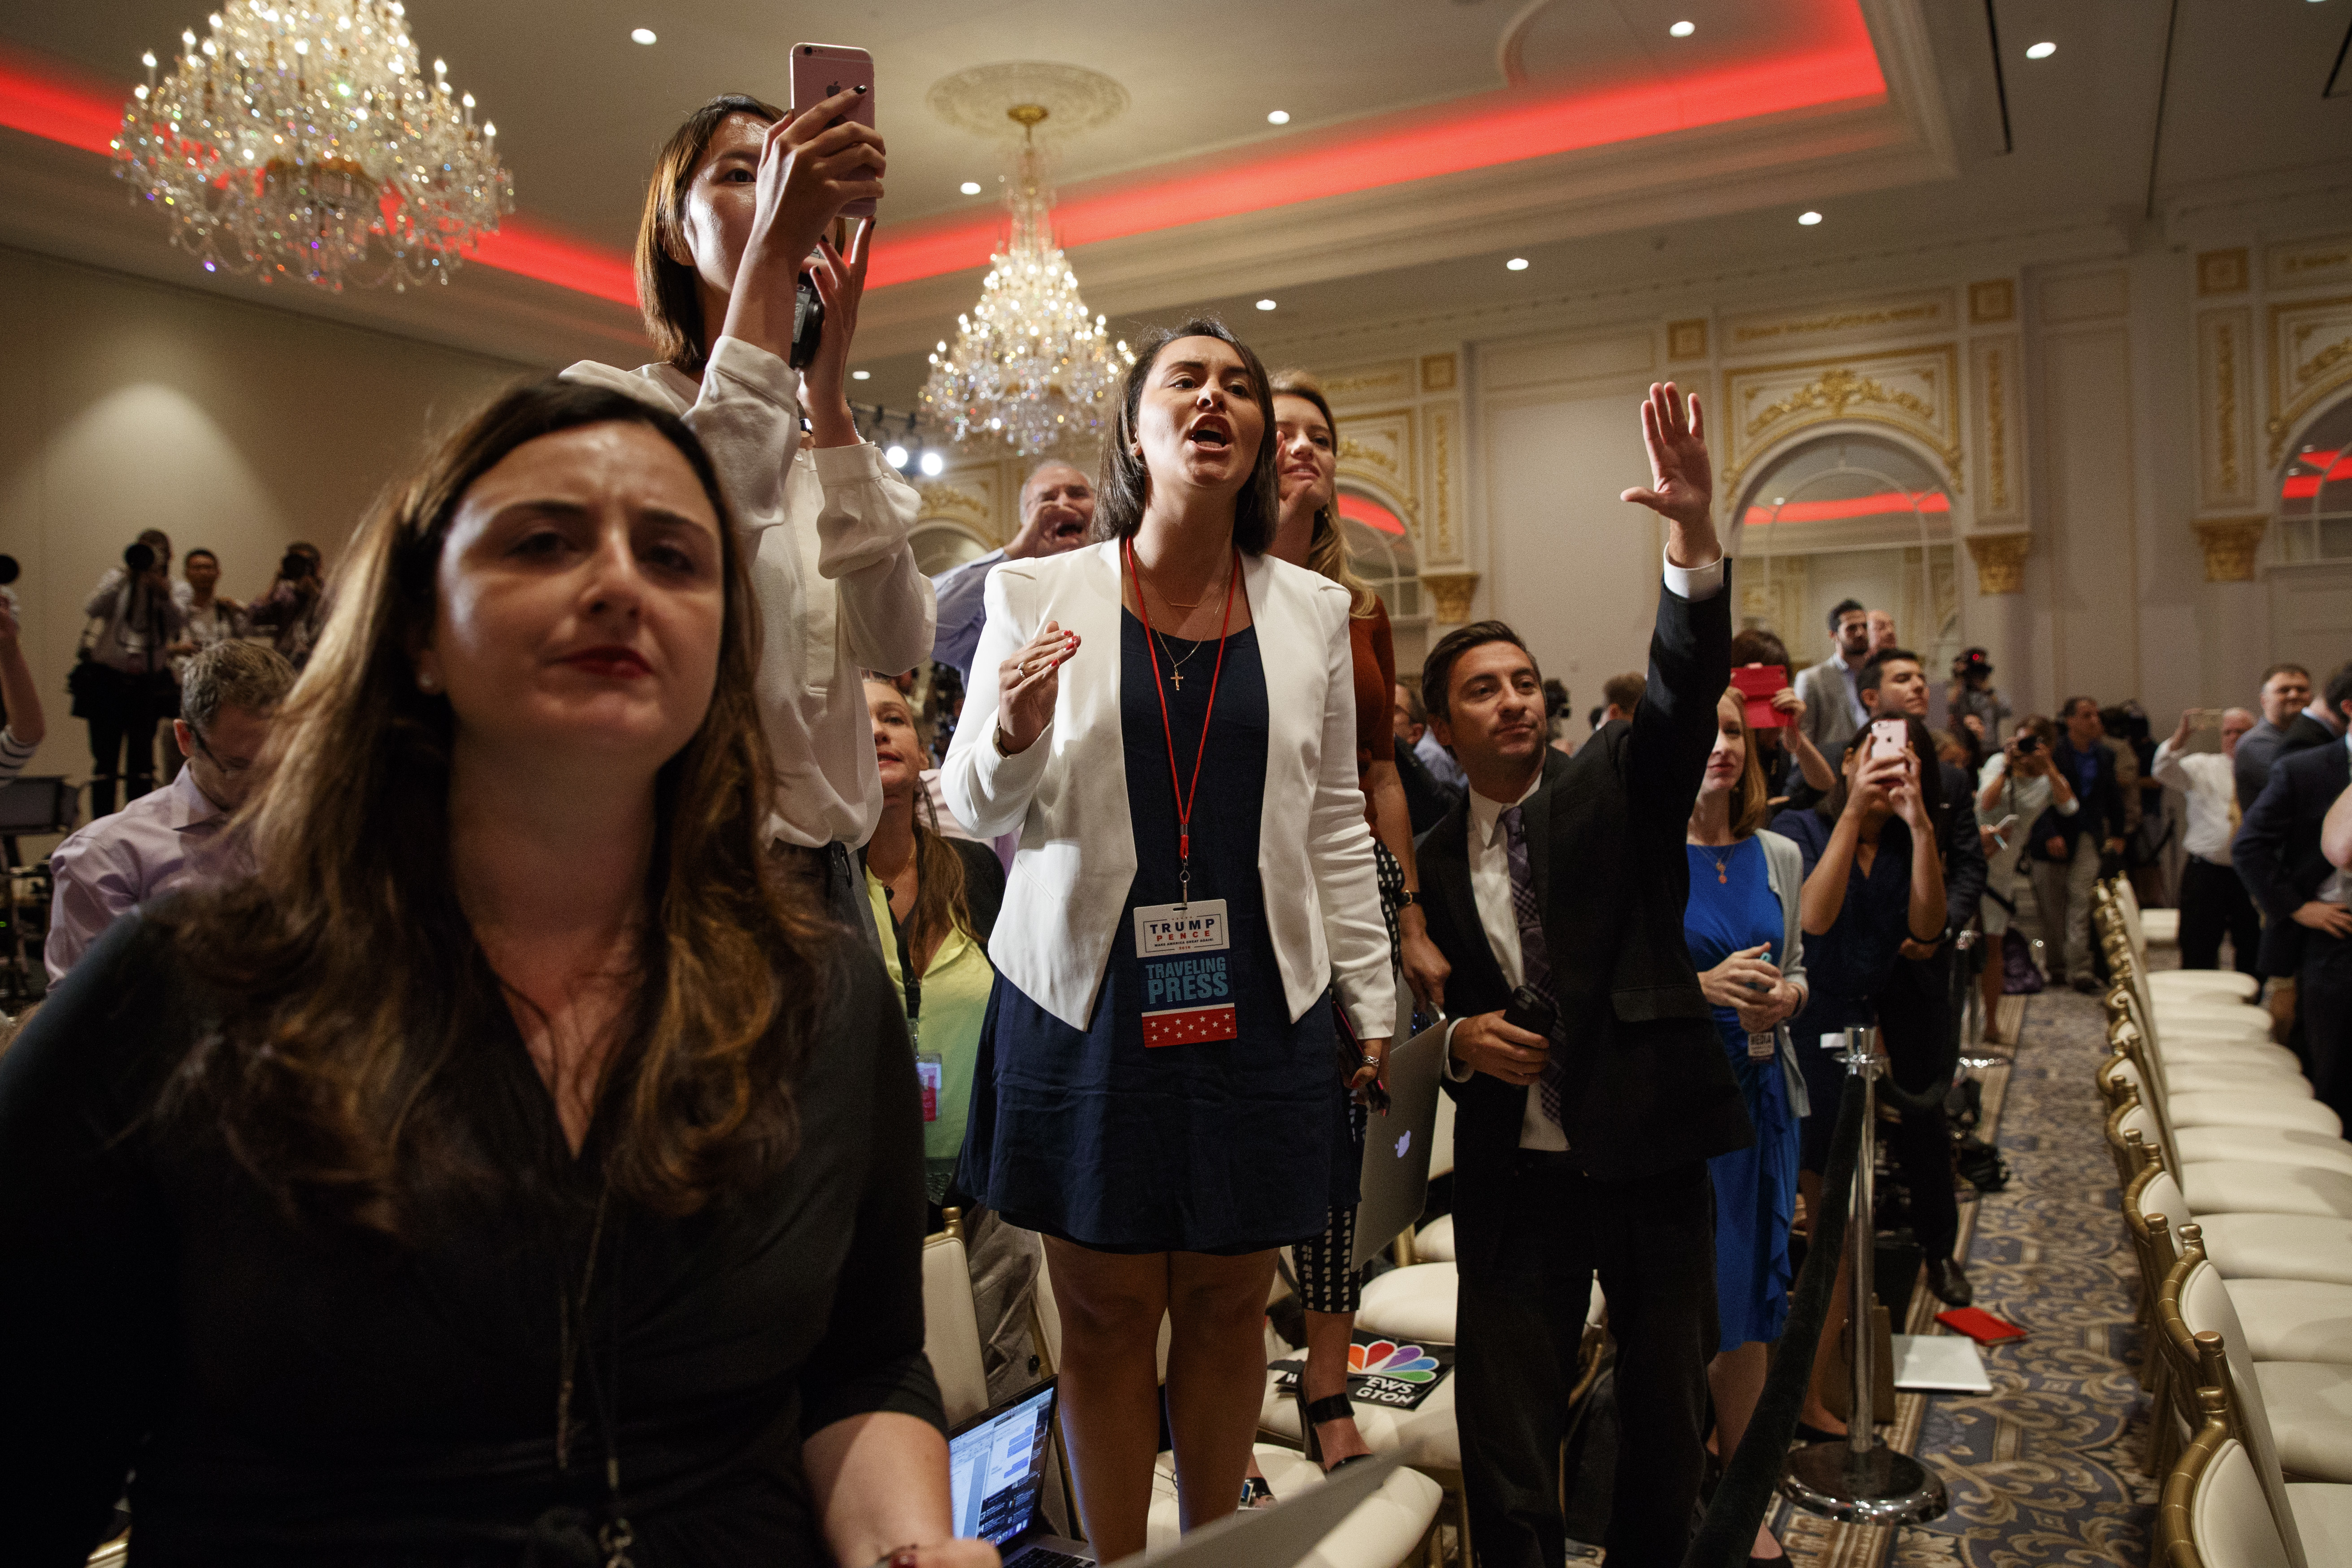 Reporters shout questions at Republican presidential candidate Donald Trump during a campaign event at Trump International Hotel, Friday, Sept. 16, 2016, in Washington. (AP Photo/ Evan Vucci)